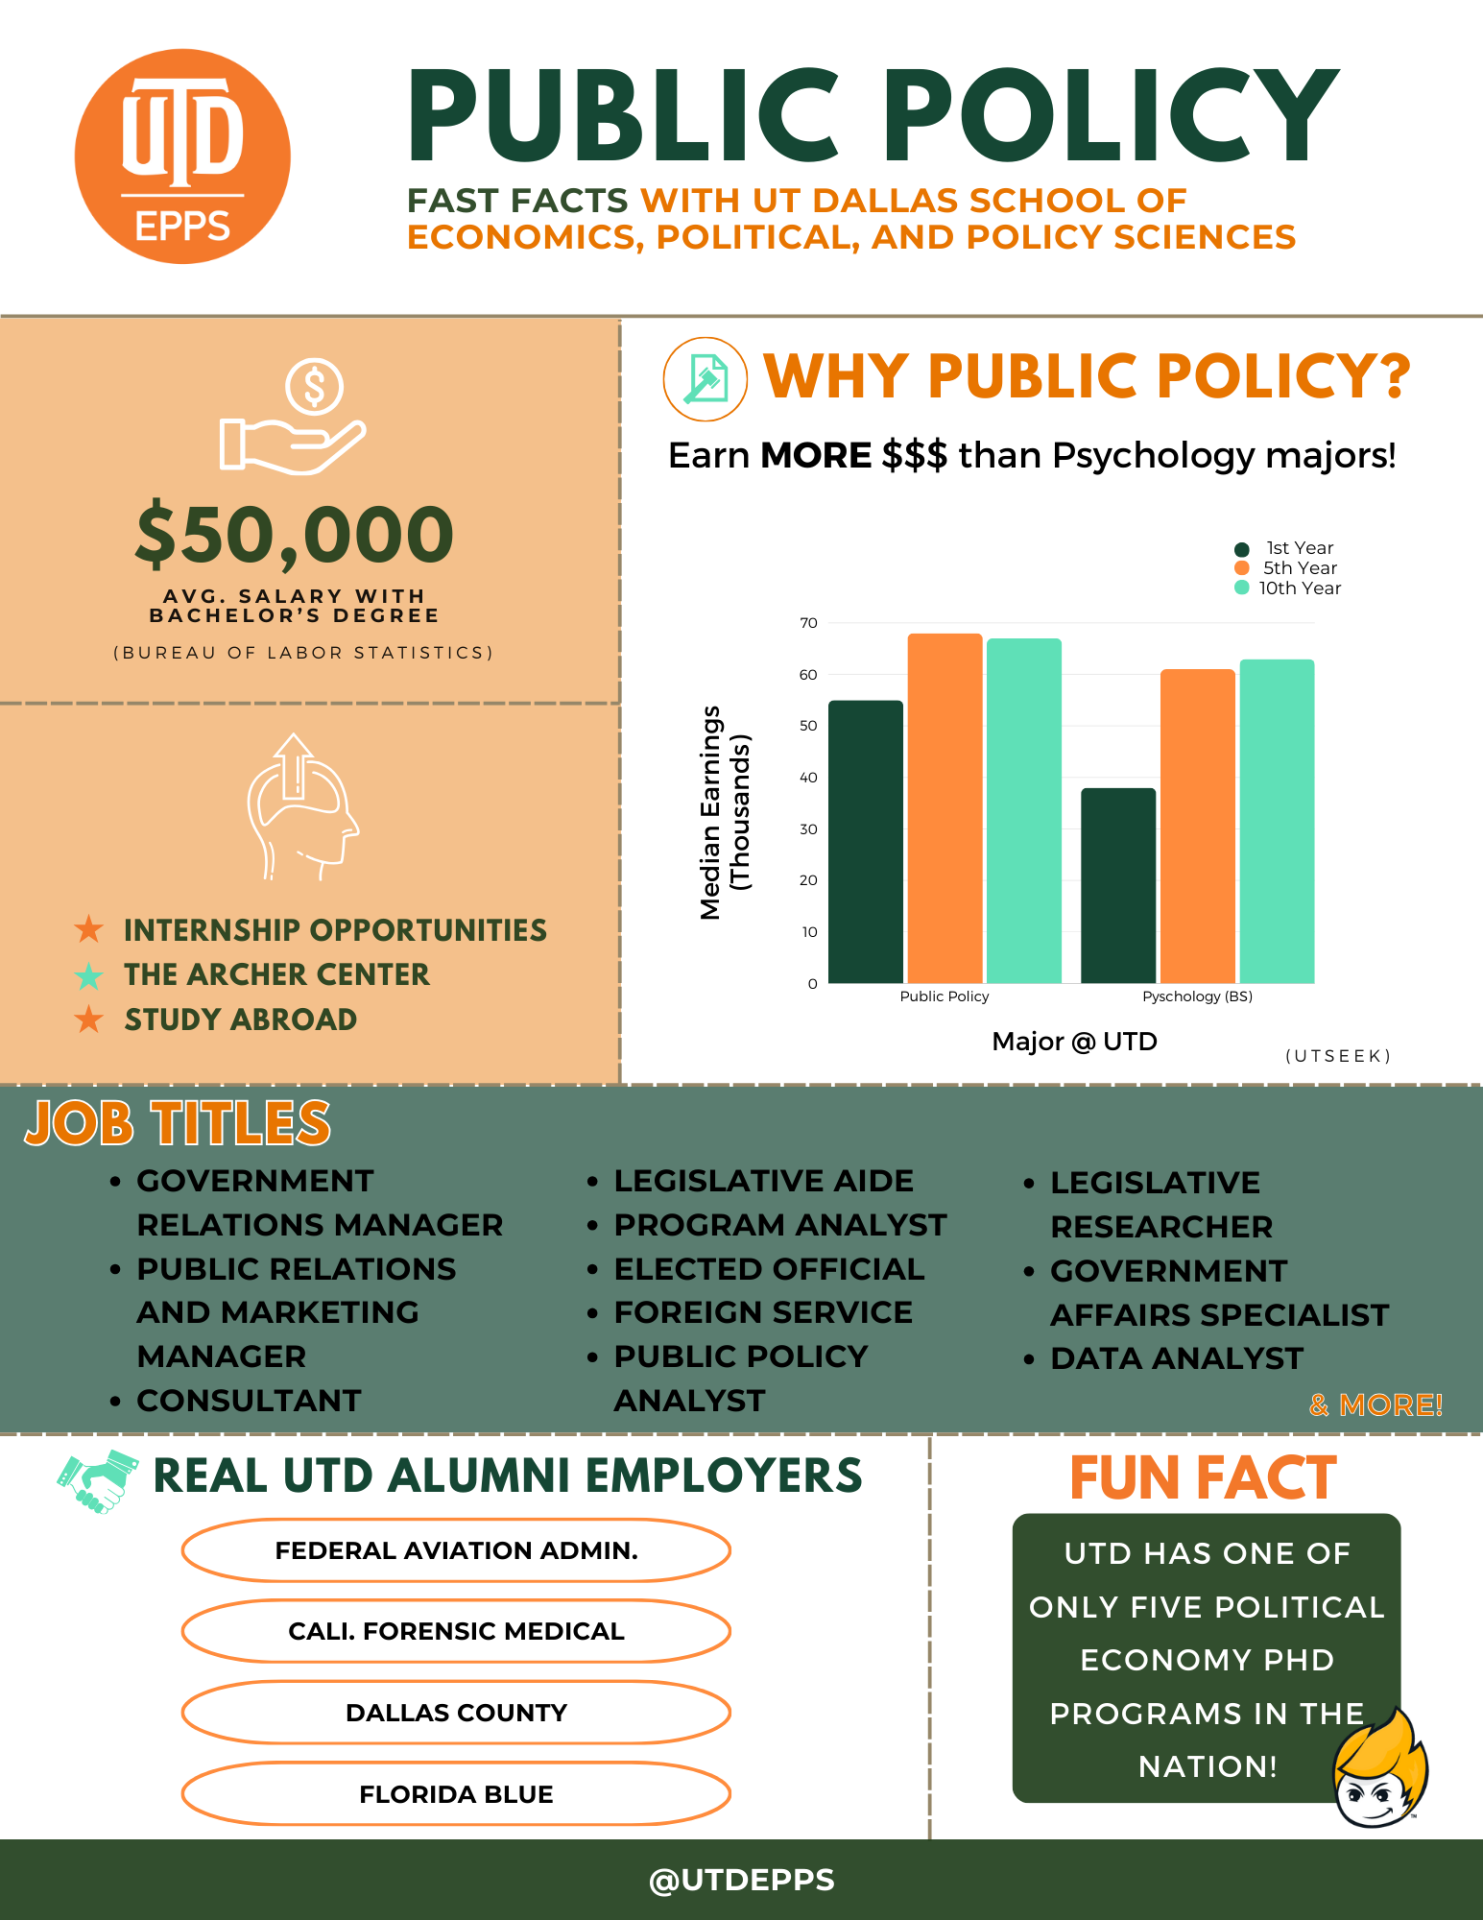 Public Policy
Fast Facts with Ut dallas school of economics, political, and policy sciences

,000 is the average Salary with bachelor’s degree. Data is from Bureau of Labor Statistics. Get access to 
INTERNSHIP OPPORTUNITIES , THE ARCHER CENTER, and STUDY ABROAD.

WHY public policy?
Earn MORE money than Psychology majors! Graph shows that Public Policy majors at UTD make more than their psychology major counterparts in the 1st Year, 5th Year, and 10th Year. Data is from UTSEEK.

Job titles include:
GOVERNMENT RELATIONS MANAGER
PUBLIC RELATIONS AND MARKETING MANAGER
CONSULTANT
LEGISLATIVE AIDE
PROGRAM ANALYST
ELECTED OFFICIAL
FOREIGN SERVICE
PUBLIC POLICY ANALYST
LEGISLATIVE RESEARCHER
GOVERNMENT AFFAIRS SPECIALIST
DATA ANALYST
& MORE!
 
Real UTD Alumni employers:
FEDERAL AVIATION ADMIN.
CALI. FORENSIC MEDICAL
DALLAS COUNTY
FLORIDA BLUE

FUN FACT:
UTD has one of only five political economy phd programs in the nation!

@UTDEPPS

